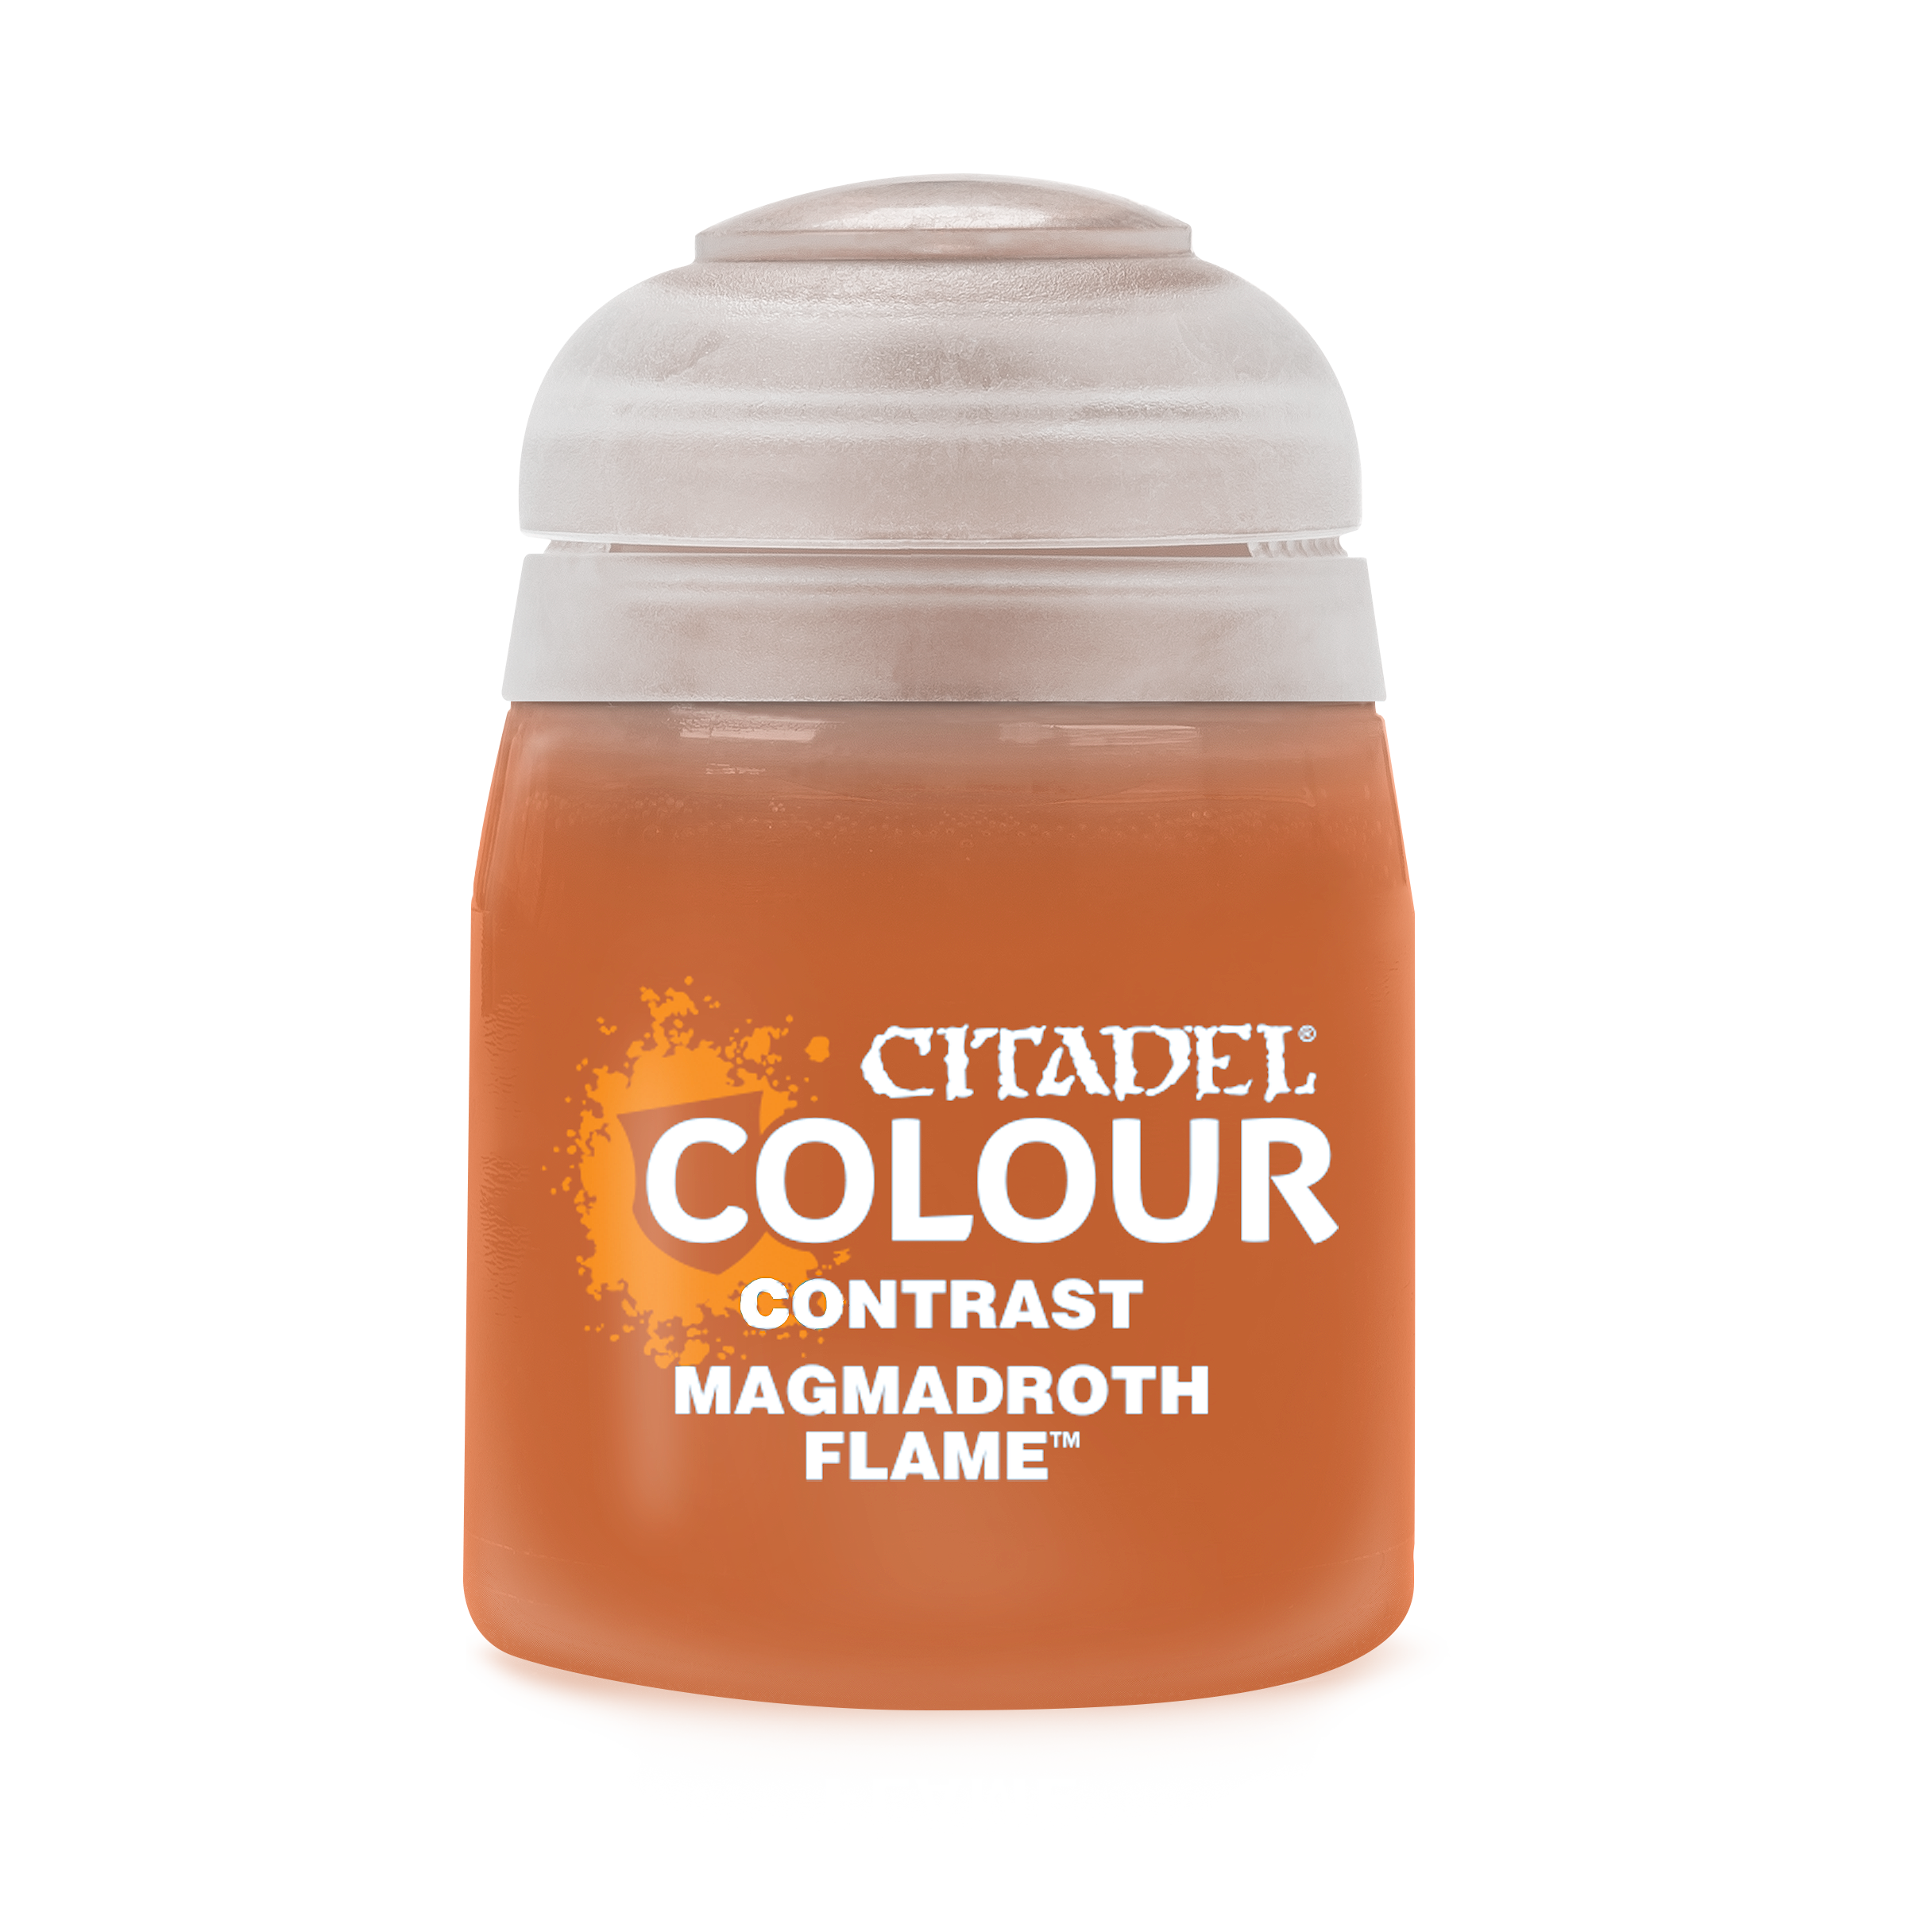 Contrast Magmadroth Flame - Citadel Colour